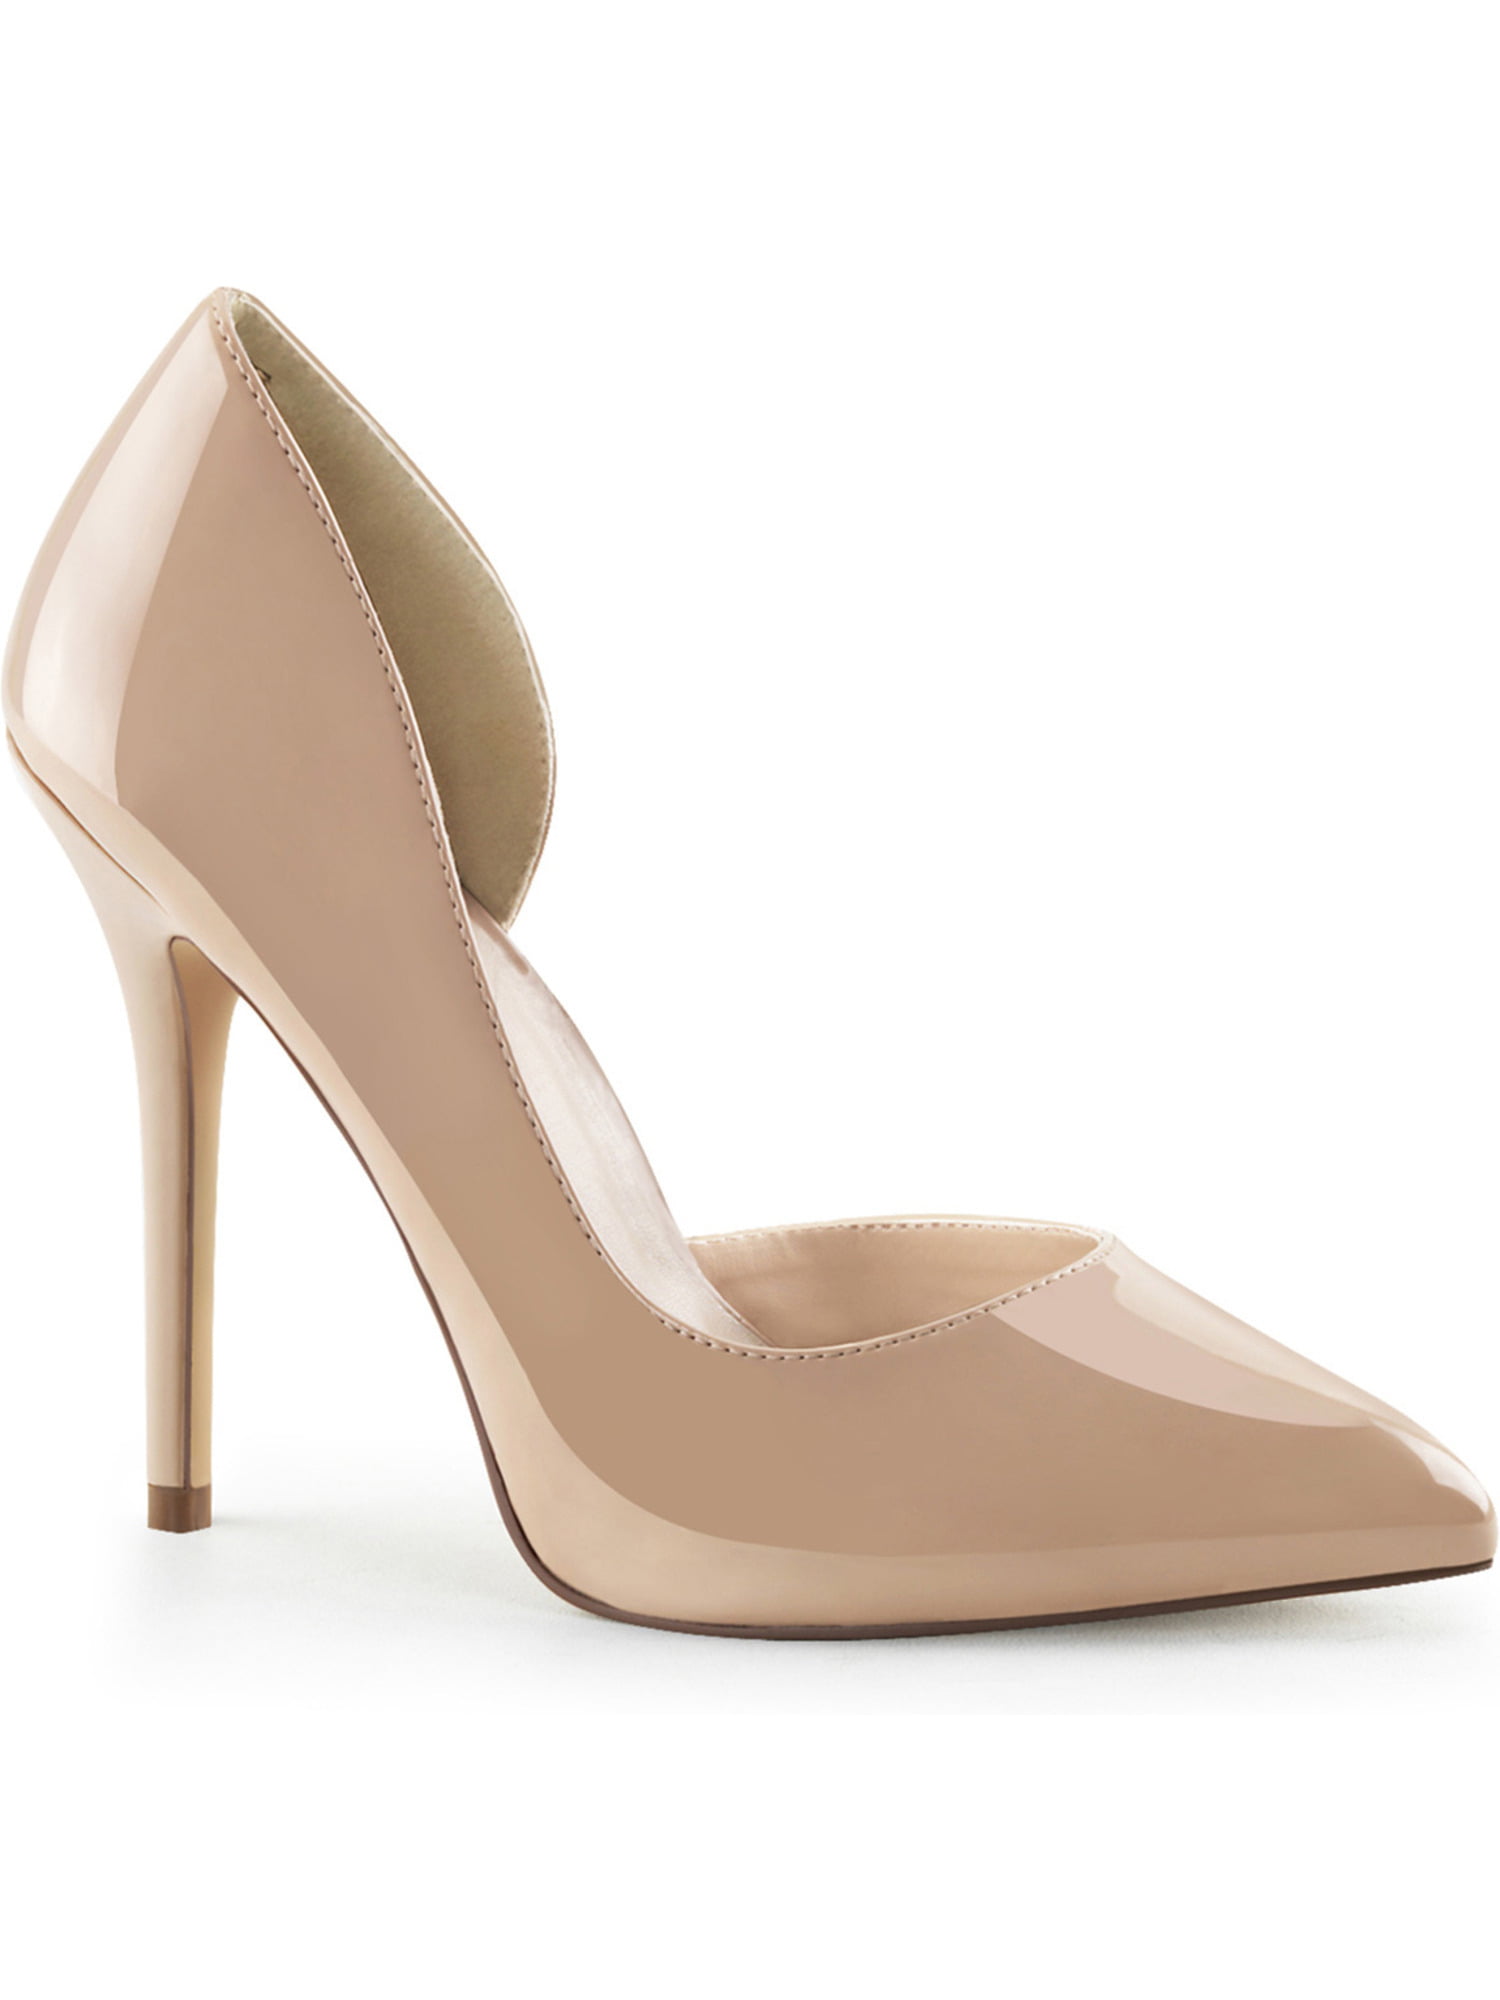 Womens Nude High Heel Shoes Patent 